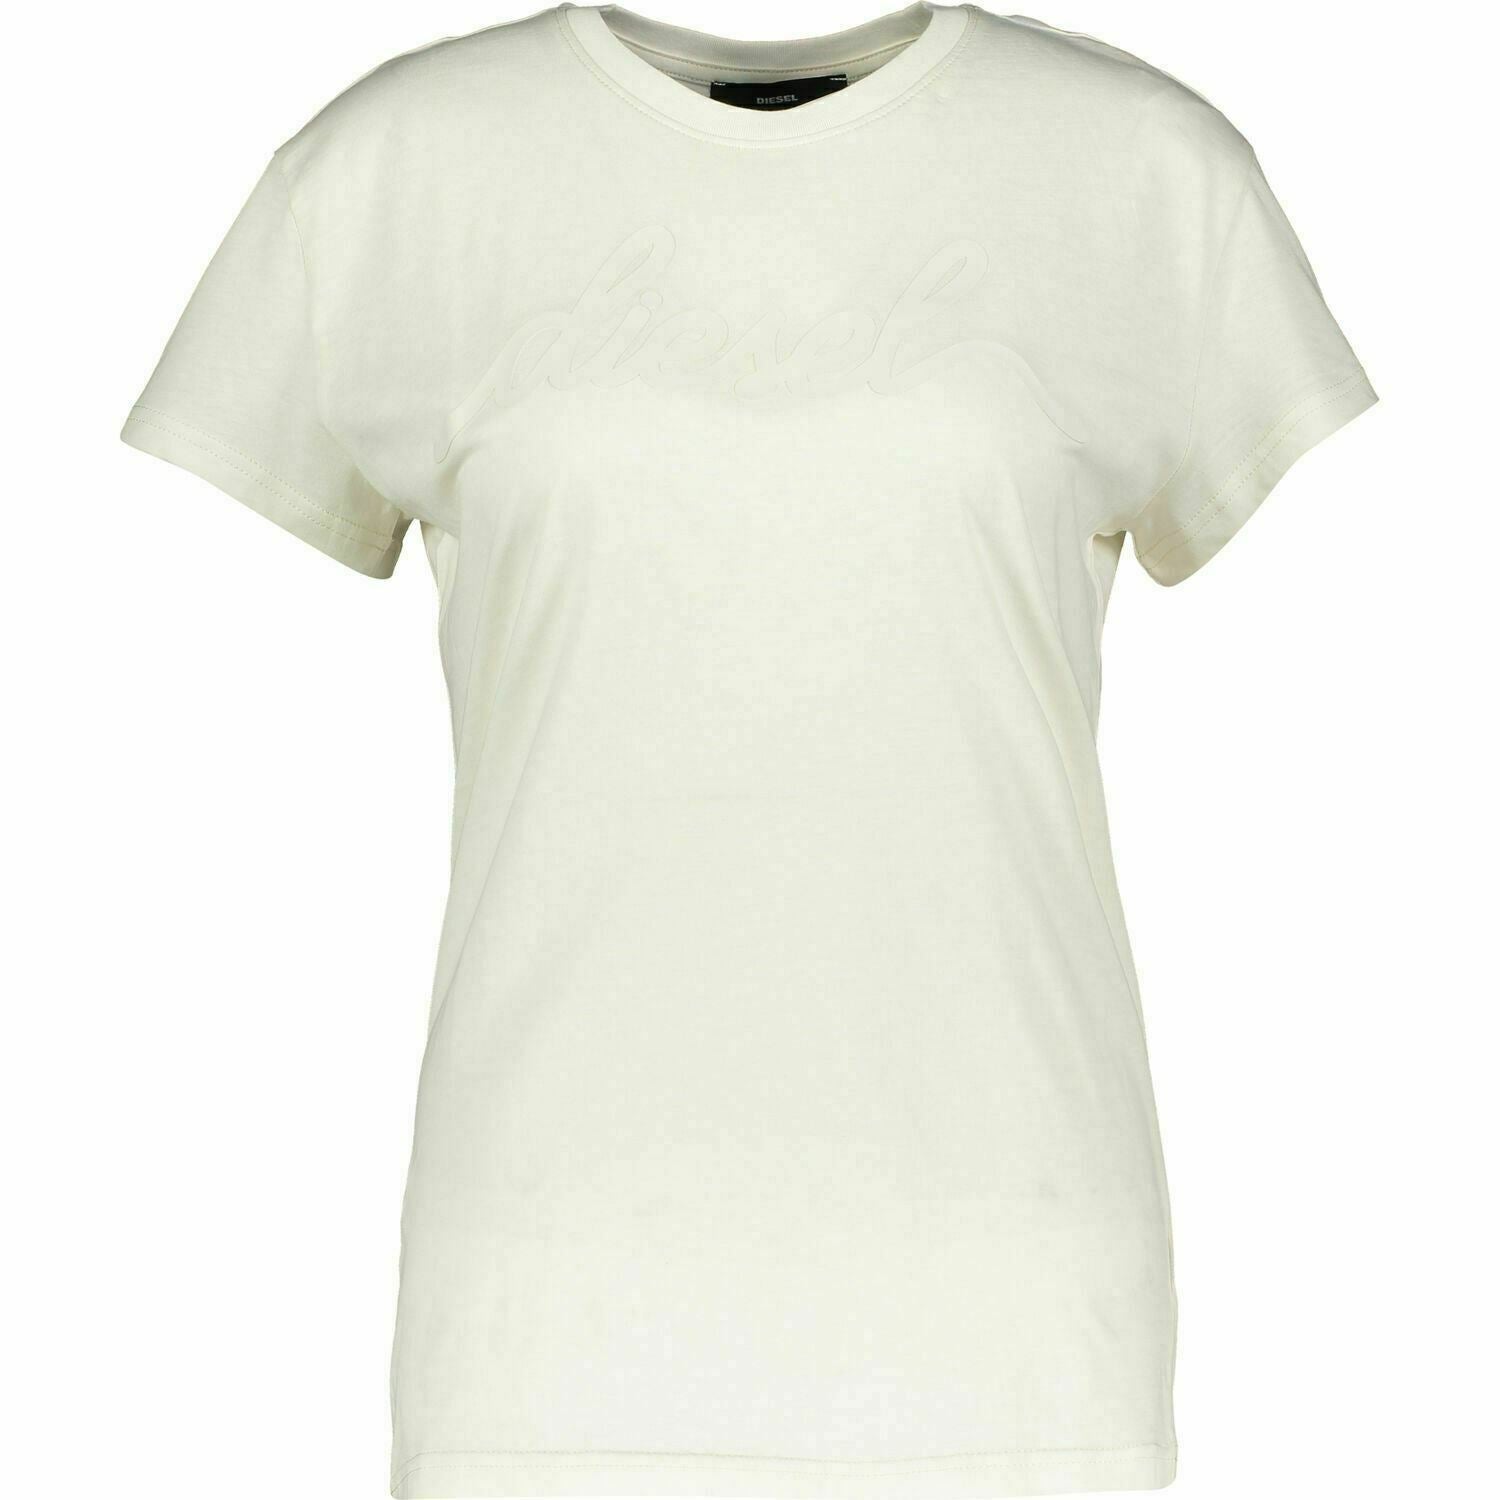 Genuine Diesel Womens Off White Sully T-Shirt Size XL